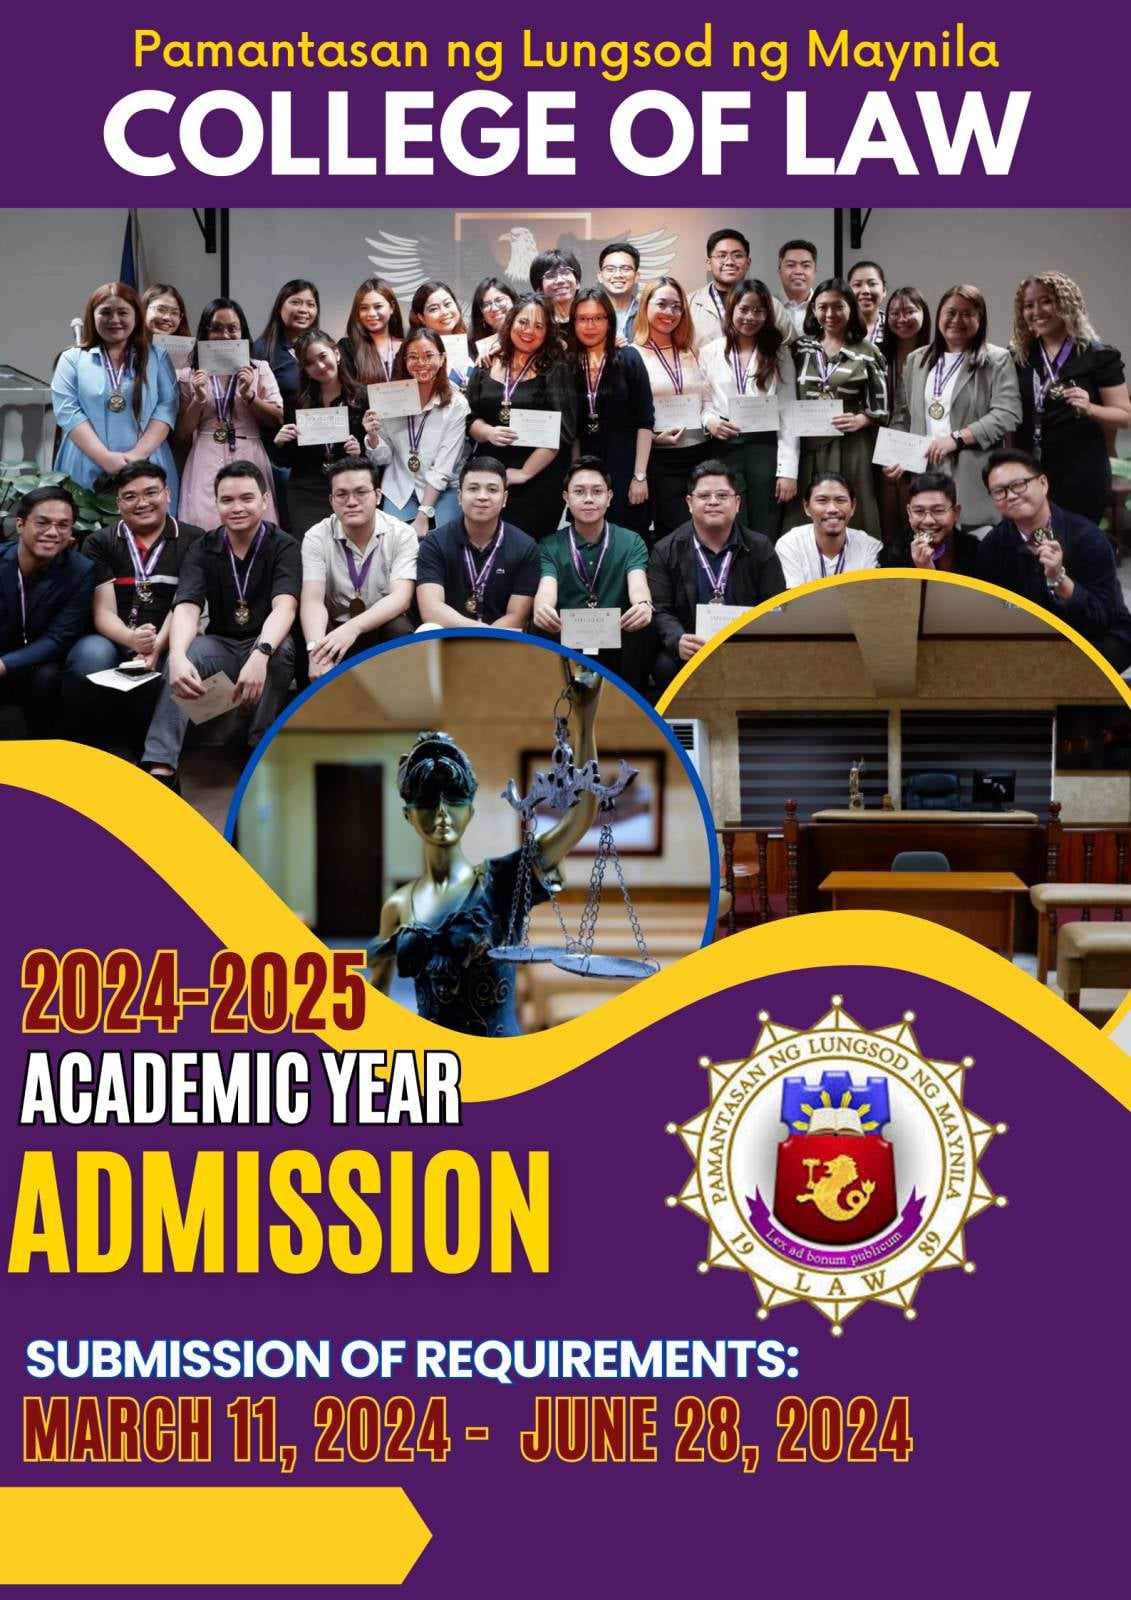 The PLM COLLEGE OF LAW is now accepting applicants for SY 2024-2025